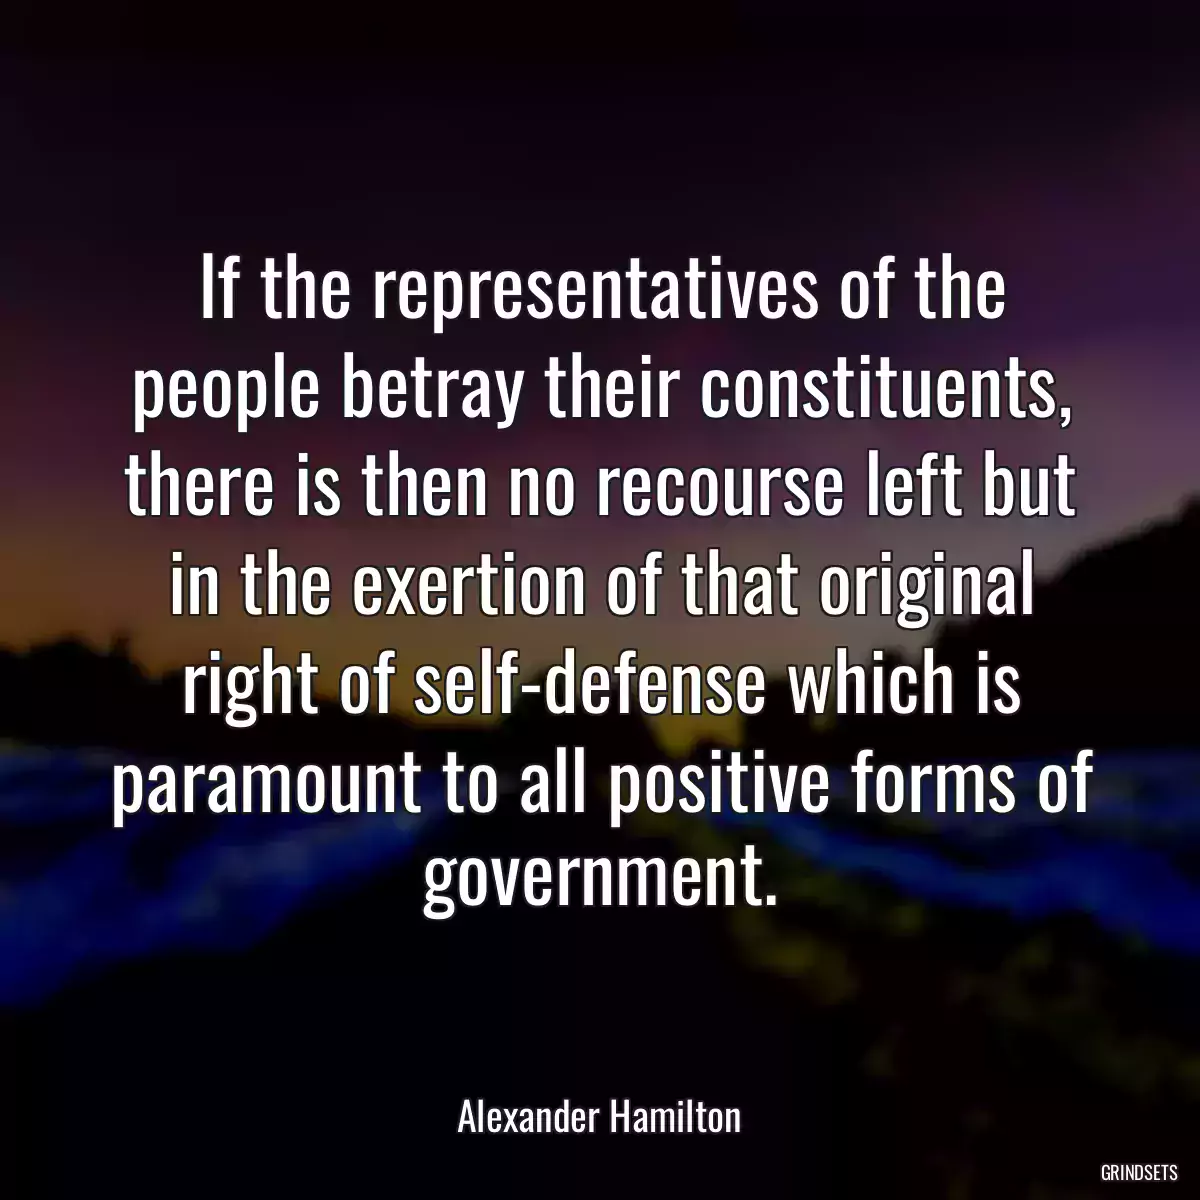 If the representatives of the people betray their constituents, there is then no recourse left but in the exertion of that original right of self-defense which is paramount to all positive forms of government.